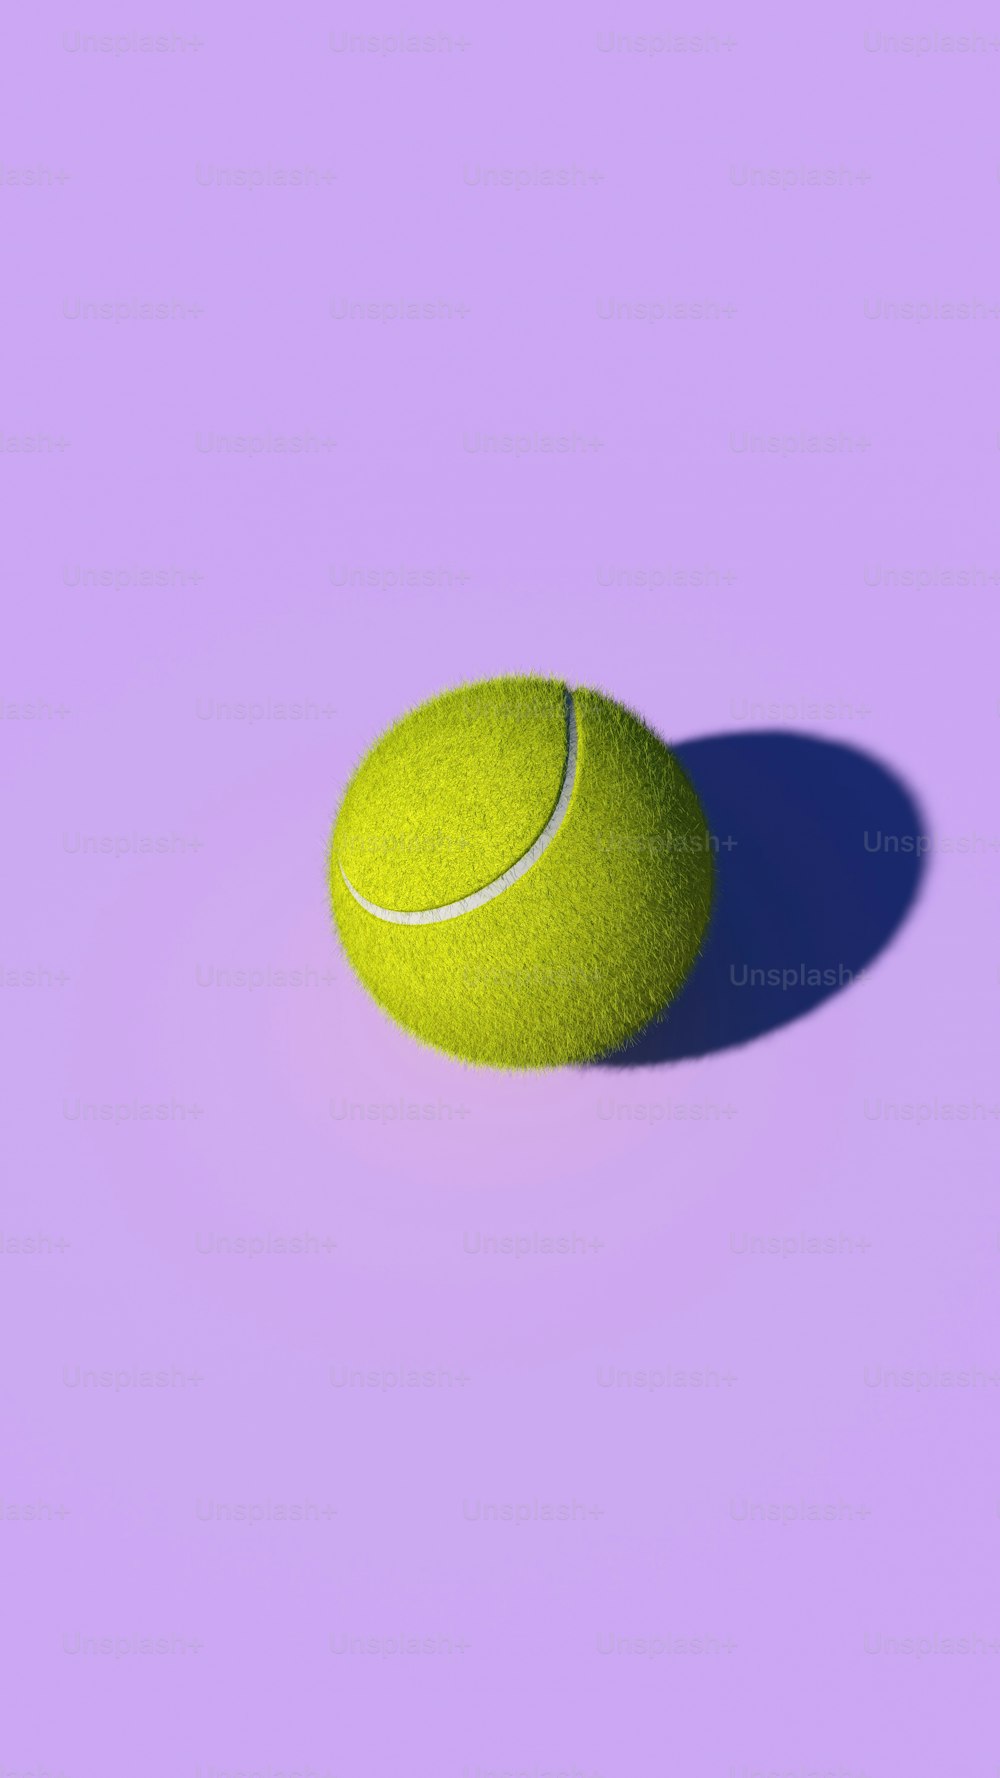 a yellow tennis ball on a purple background